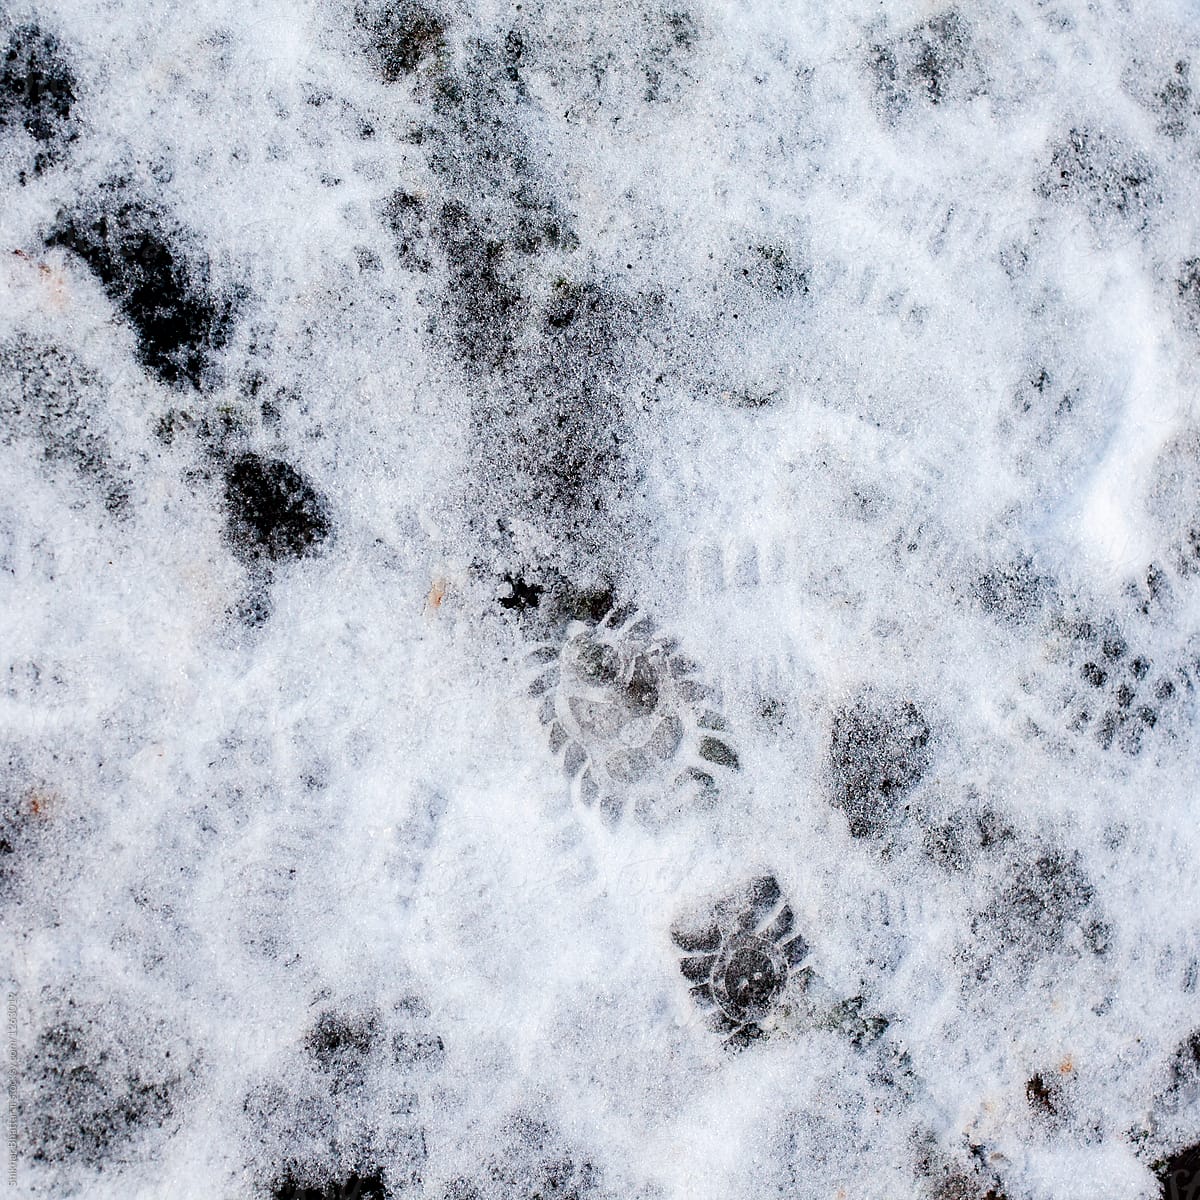 Overhead shot of foot prints in the snow.